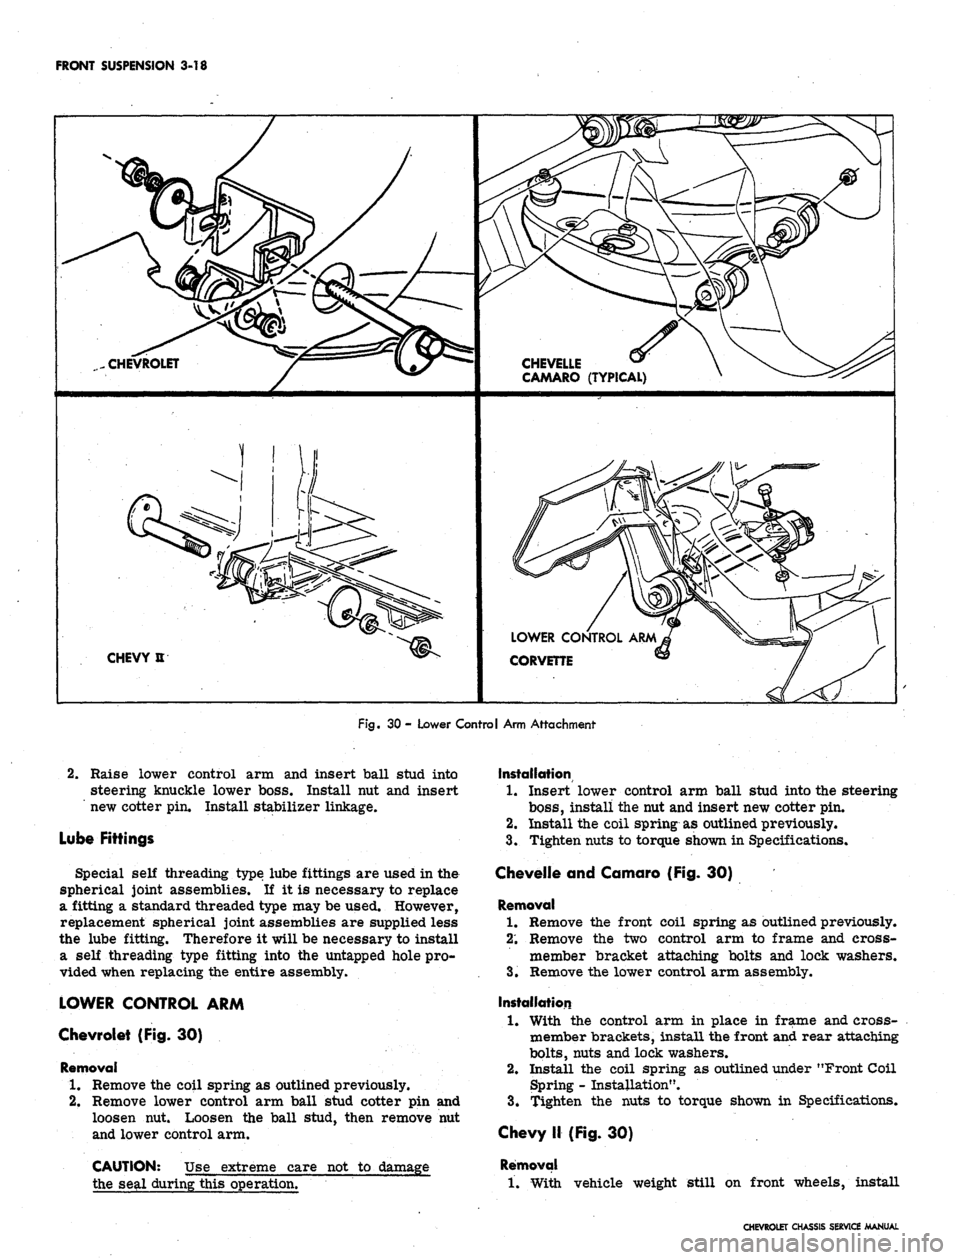 CHEVROLET CAMARO 1967 1.G Chassis Owners Manual 
FRONT SUSPENSION 3-18

CHEVROLET 
CHEVELLE

CAMARO (TYPICAL)

CHEVY U 
LOWER CONTROL ARM

CORVETTE

Fig.
 30 - Lower Control Arm Attachment

2.
 Raise lower control arm and insert ball stud into

ste